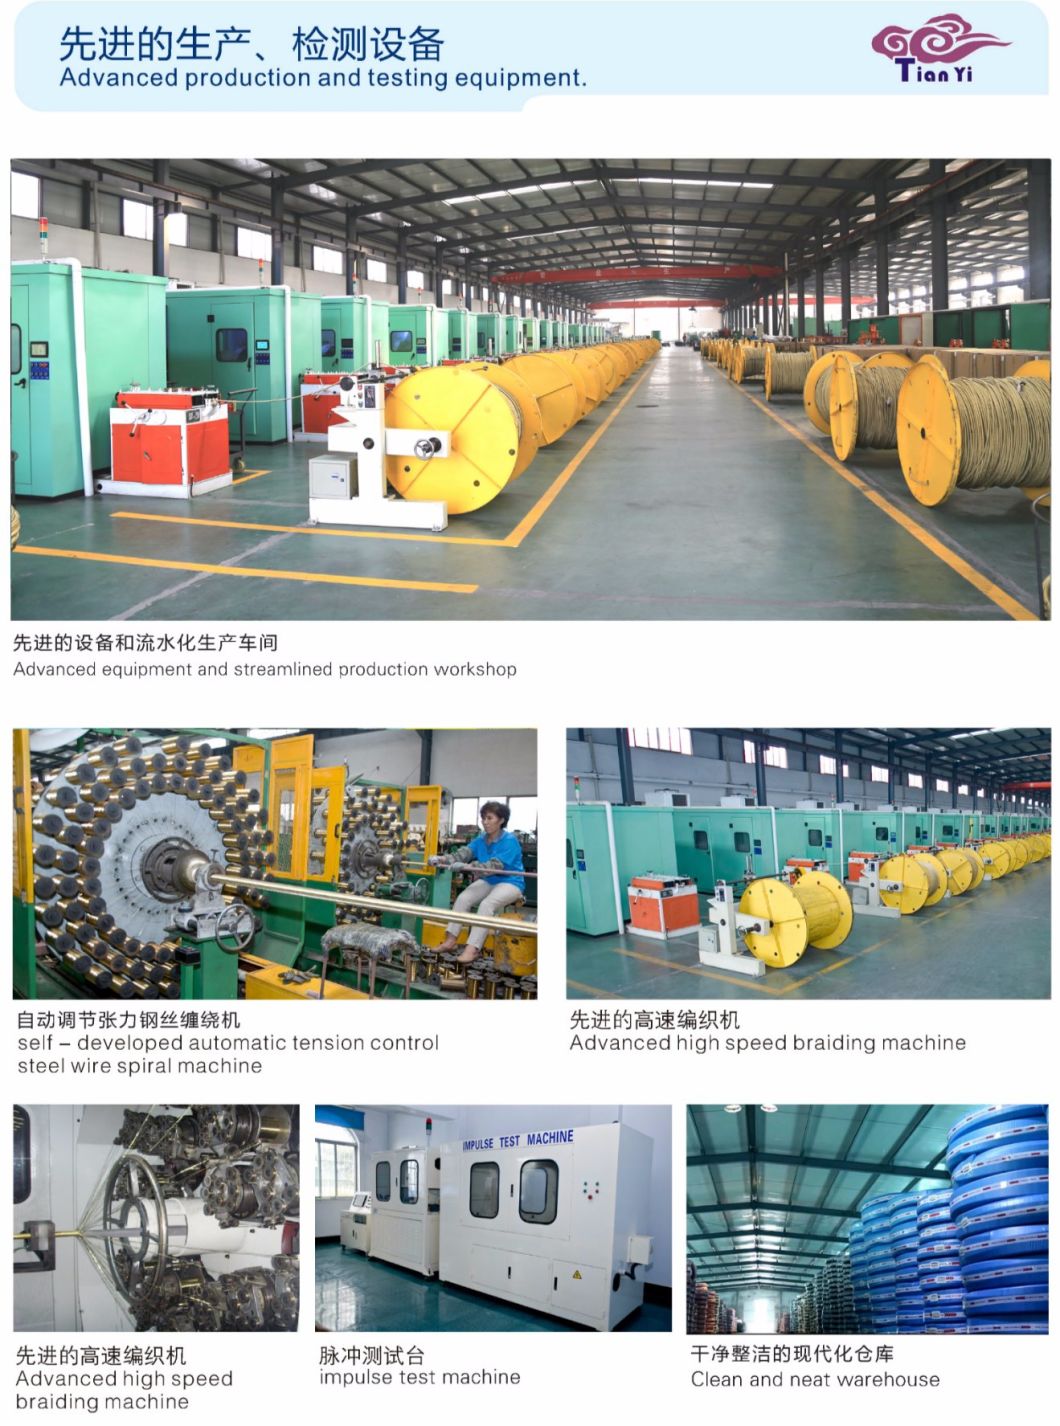 Steel Wire Braid Spiral Hydraulic Rubber Hose, Air Hose, High Pressure Flexible Hose Pipe, EPDM Steam Tube, Industrial Tubing, Hose Fittings Coupling